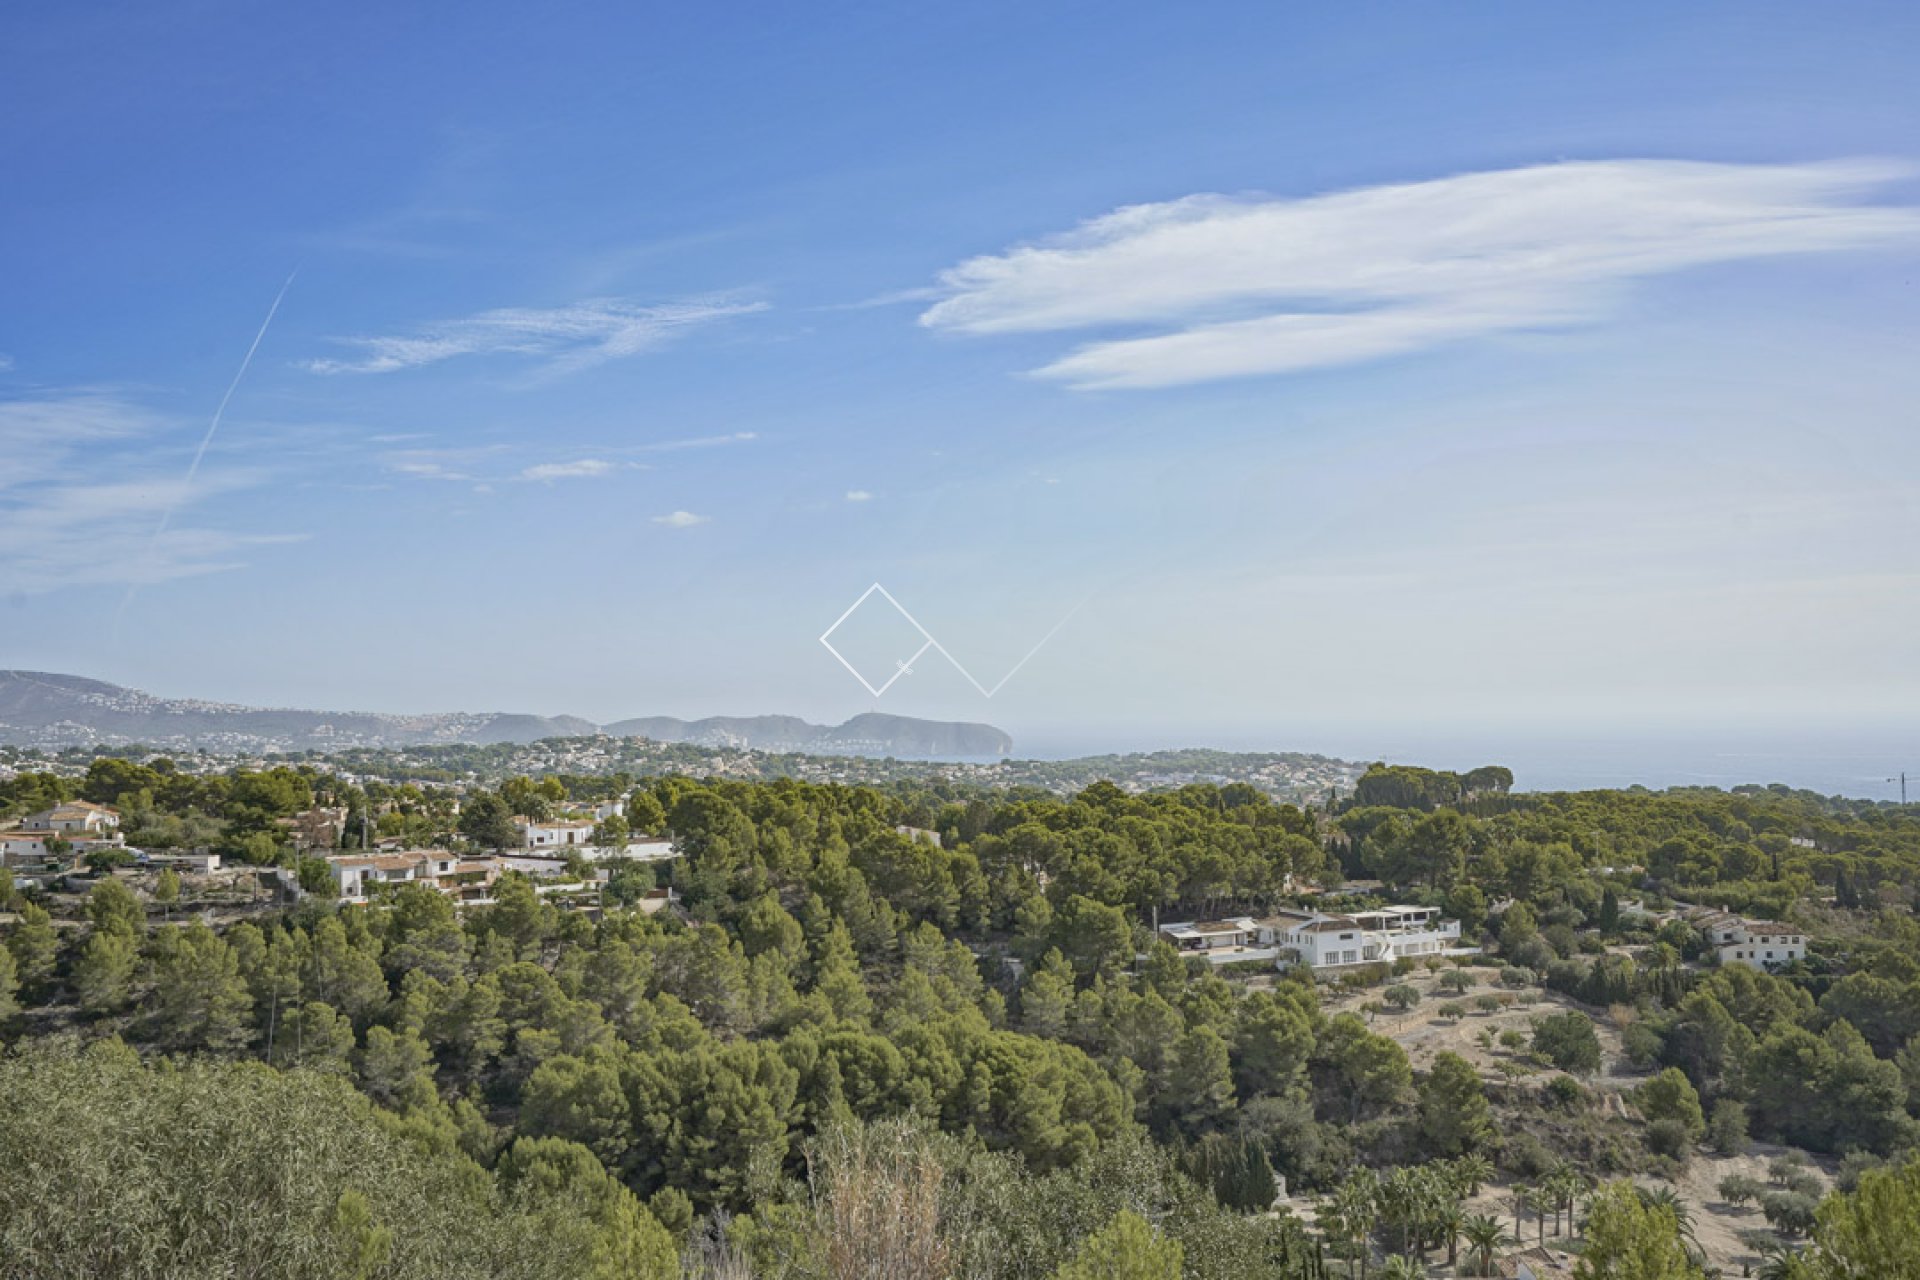  - Plots and Land - Benissa - Tossal los Bancales